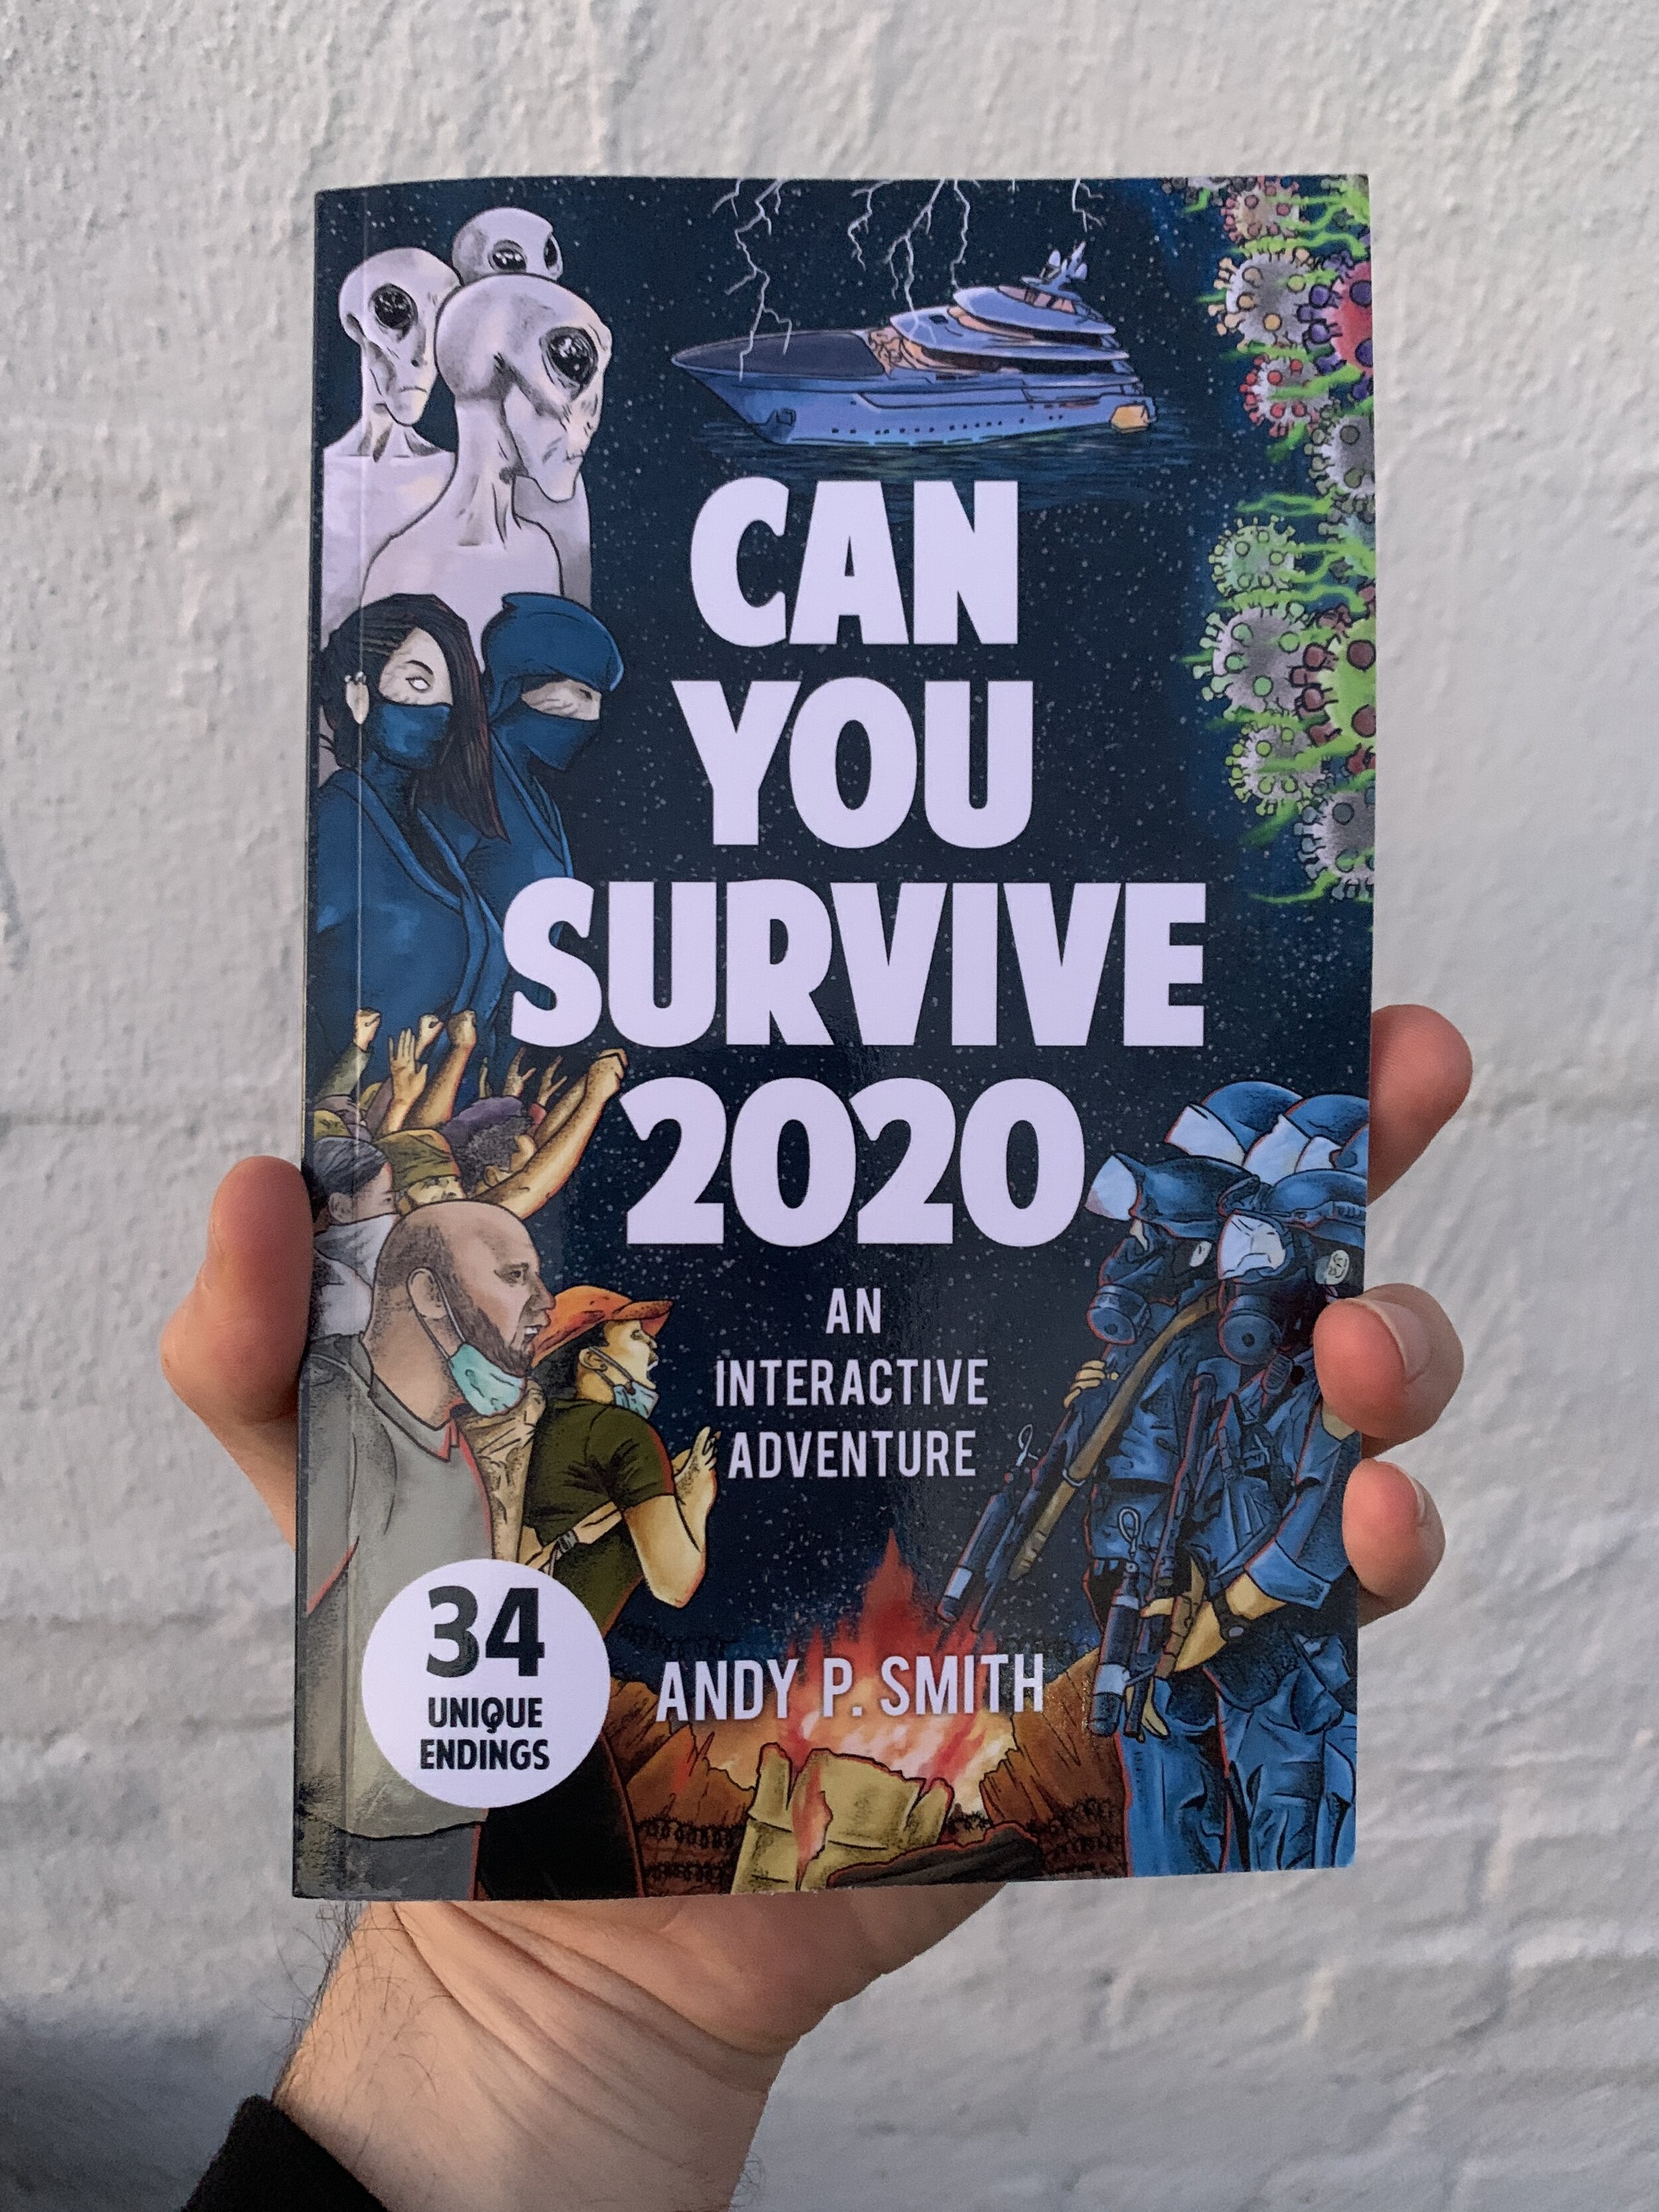 Can You Survive 2020 photo.JPG